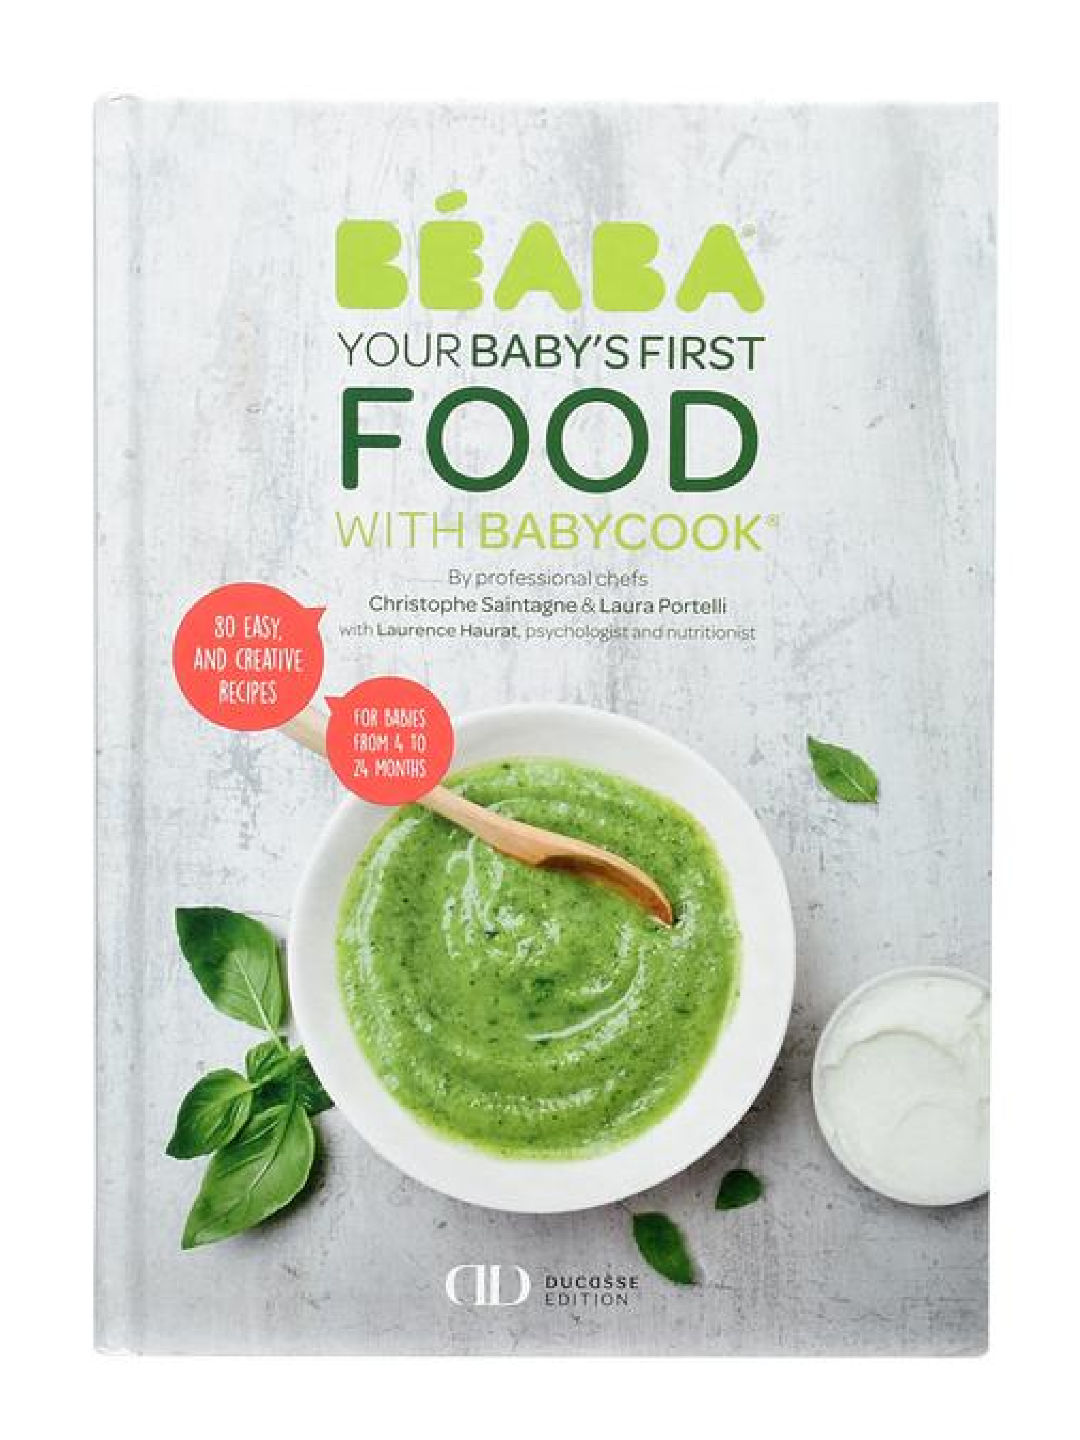 Beaba Cookbook: Baby’s First Foods with Babycook®